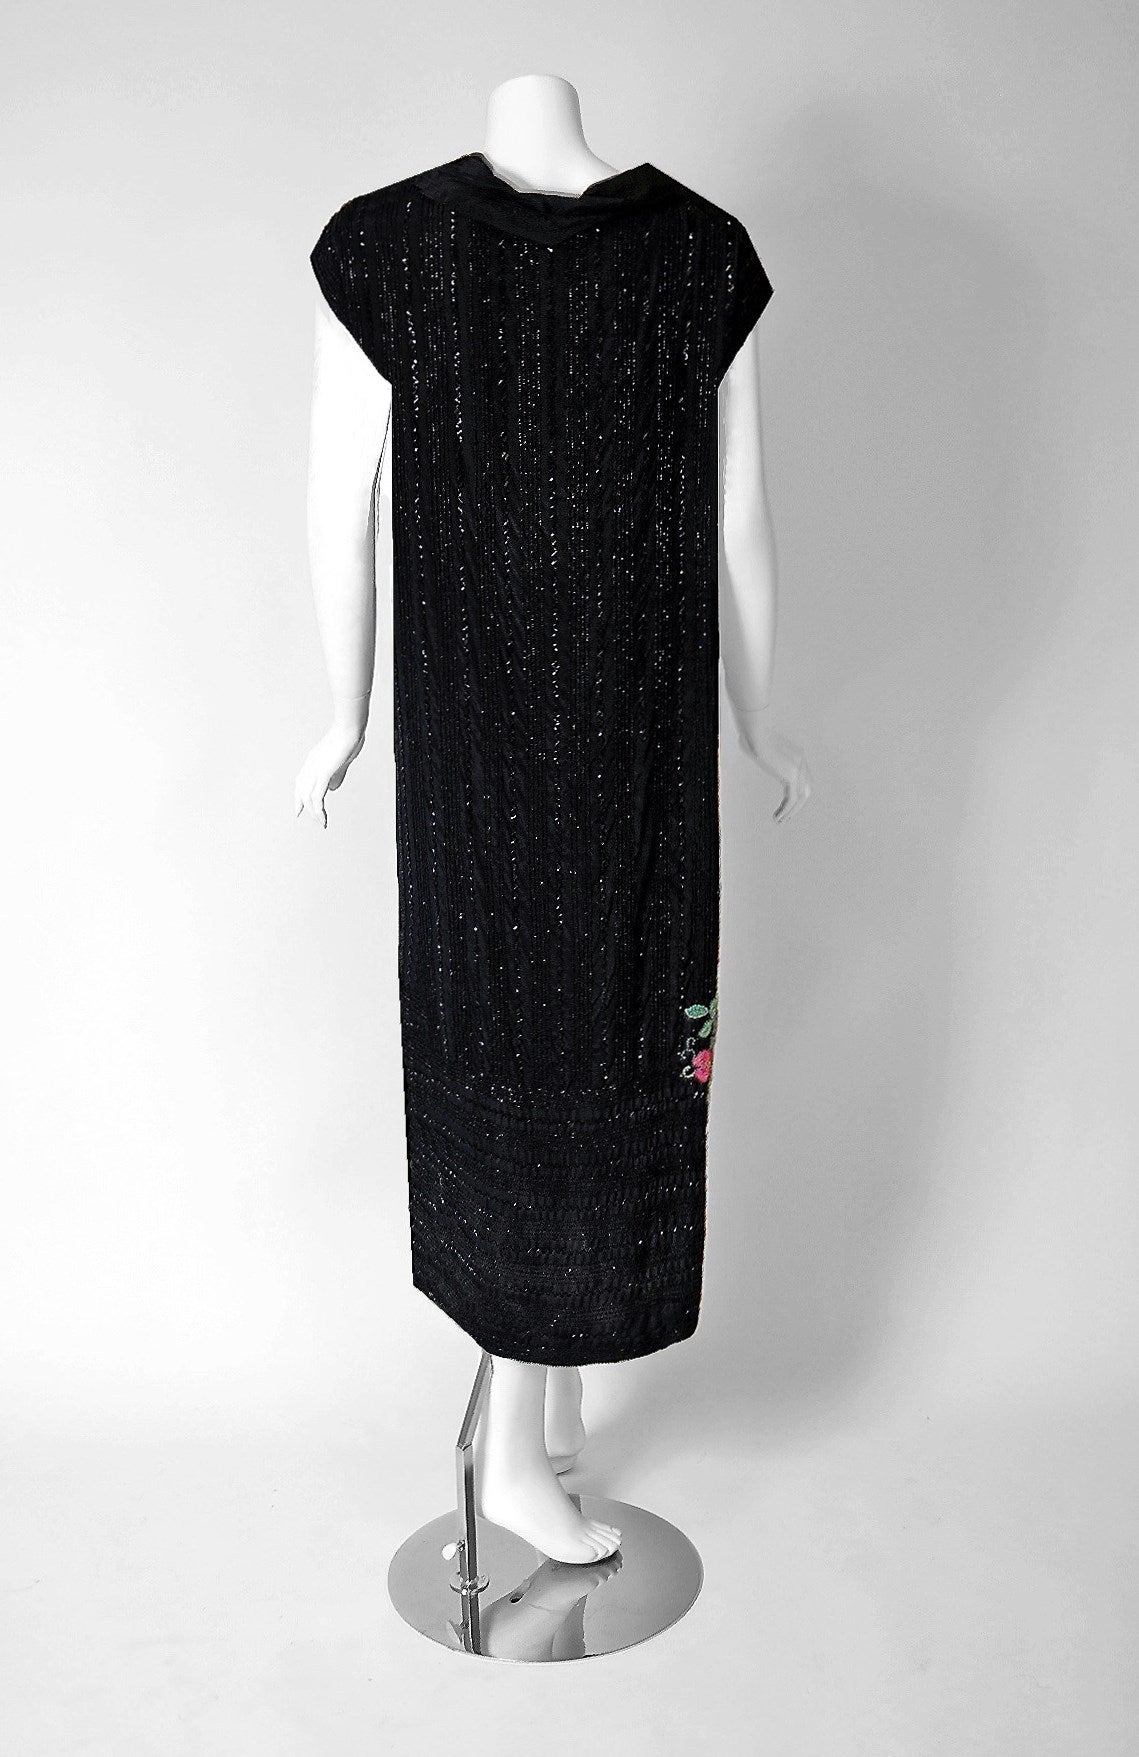 Women's 1920's French Couture Beaded Floral Black Silk Tie-Collar Deco Flapper Dress